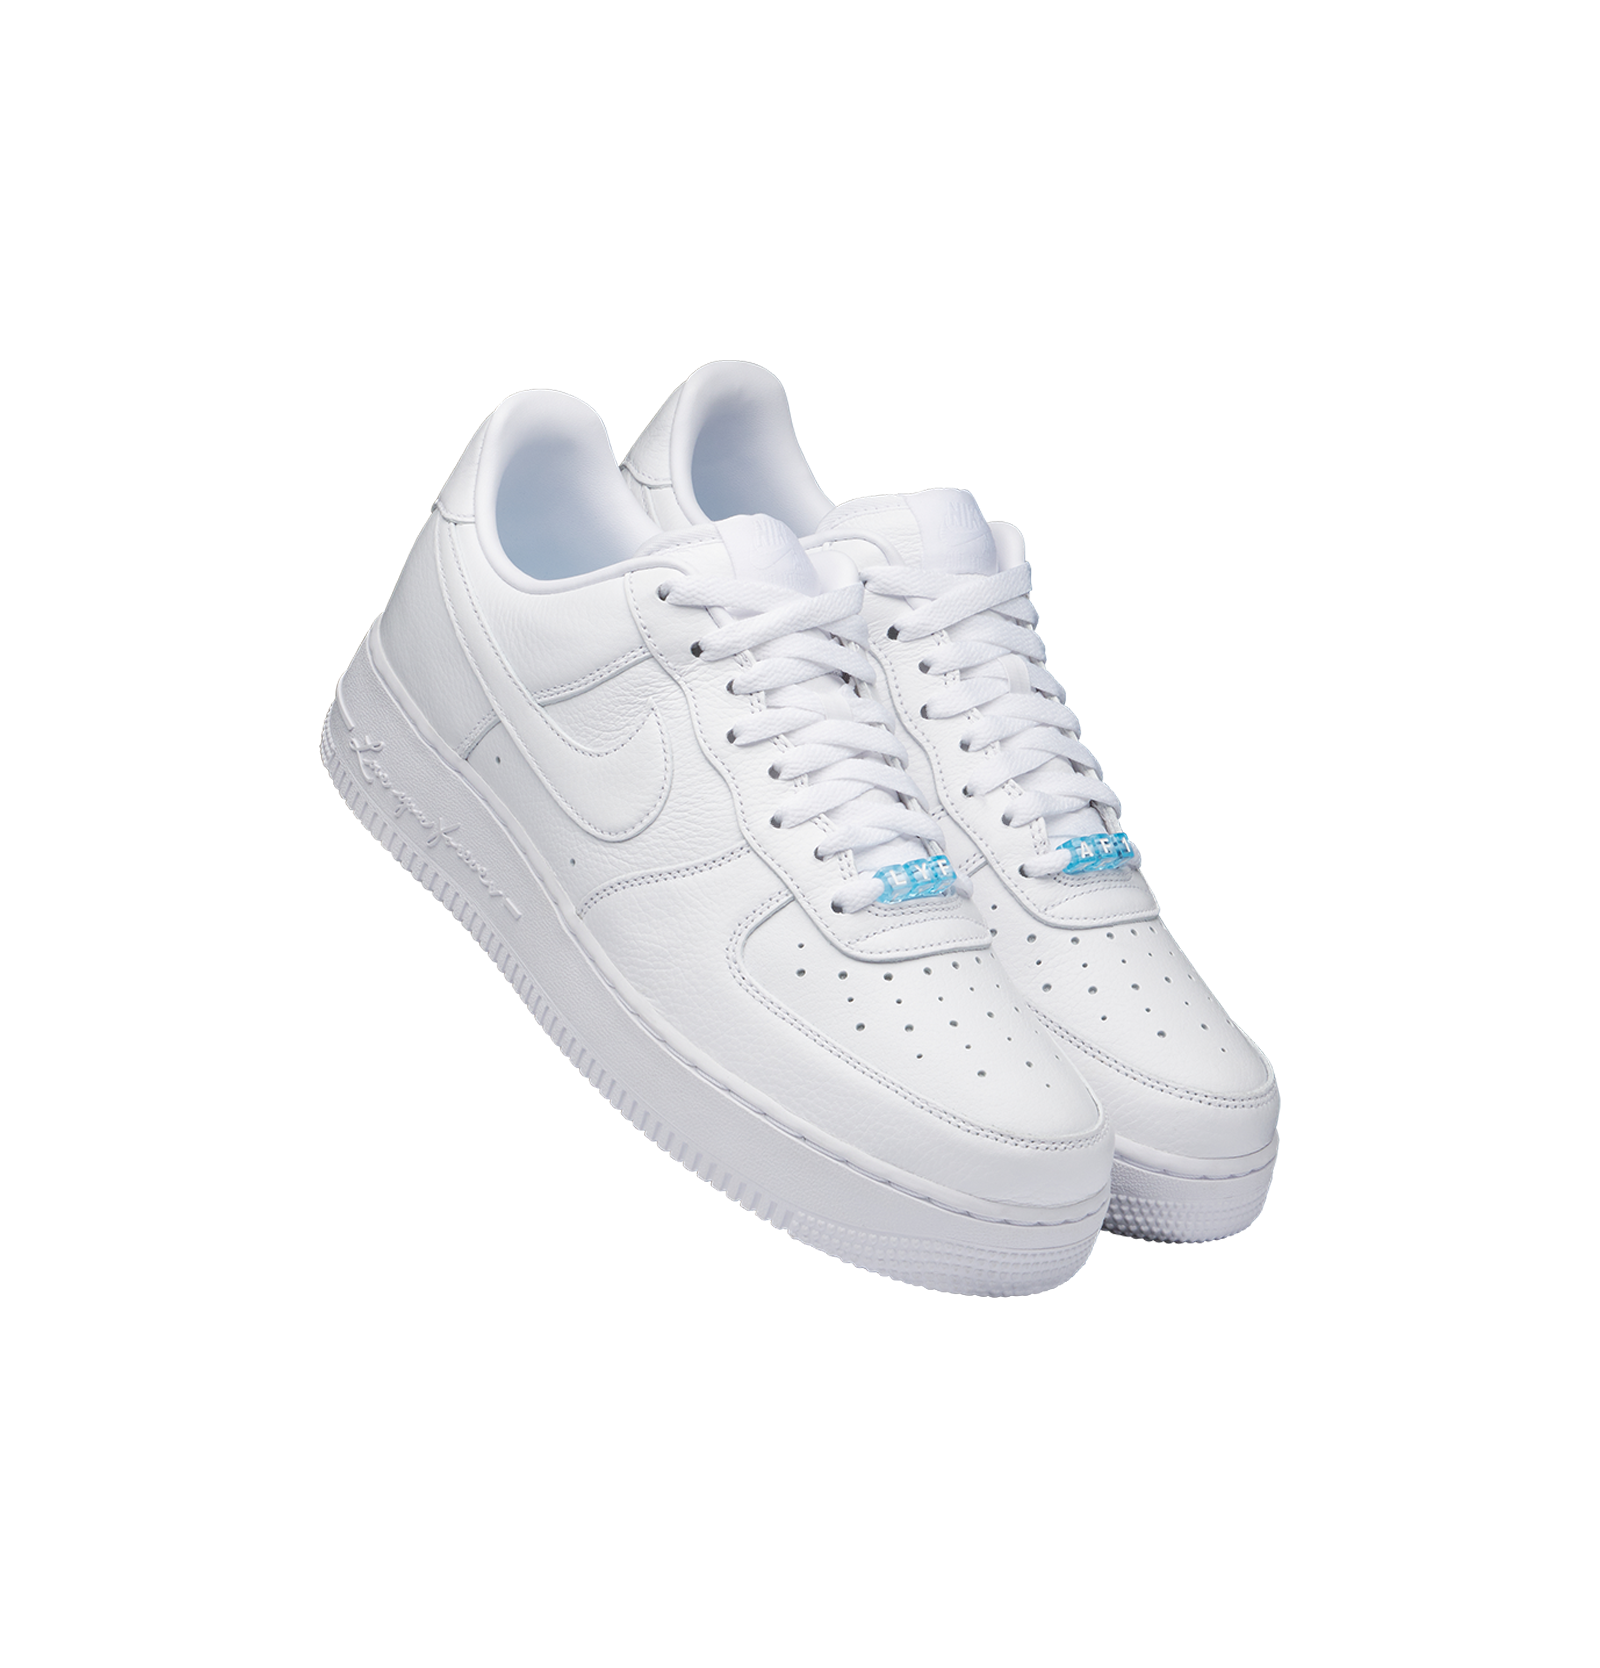 LOVE YOU FOREVER AIR FORCE 1 - IMAGE 1